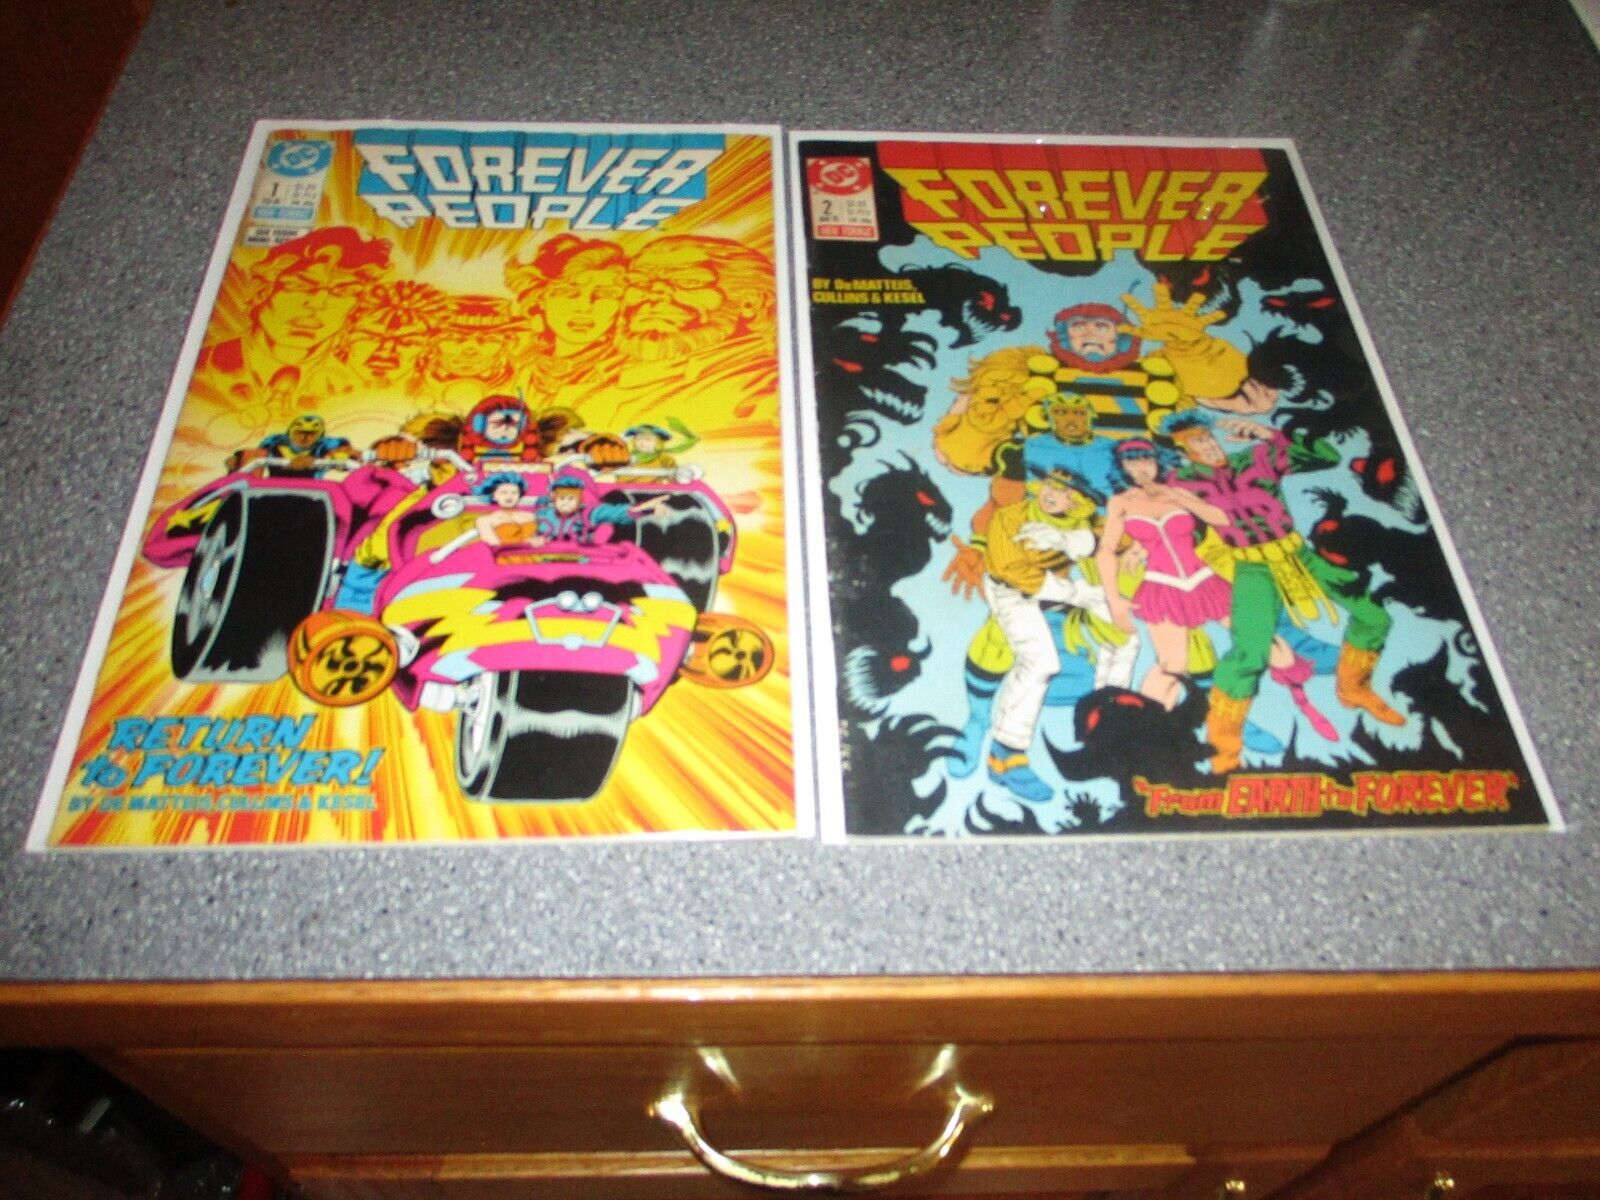 1988 DC COMICS FOREVER PEOPLE ISSUES #1 AND #2